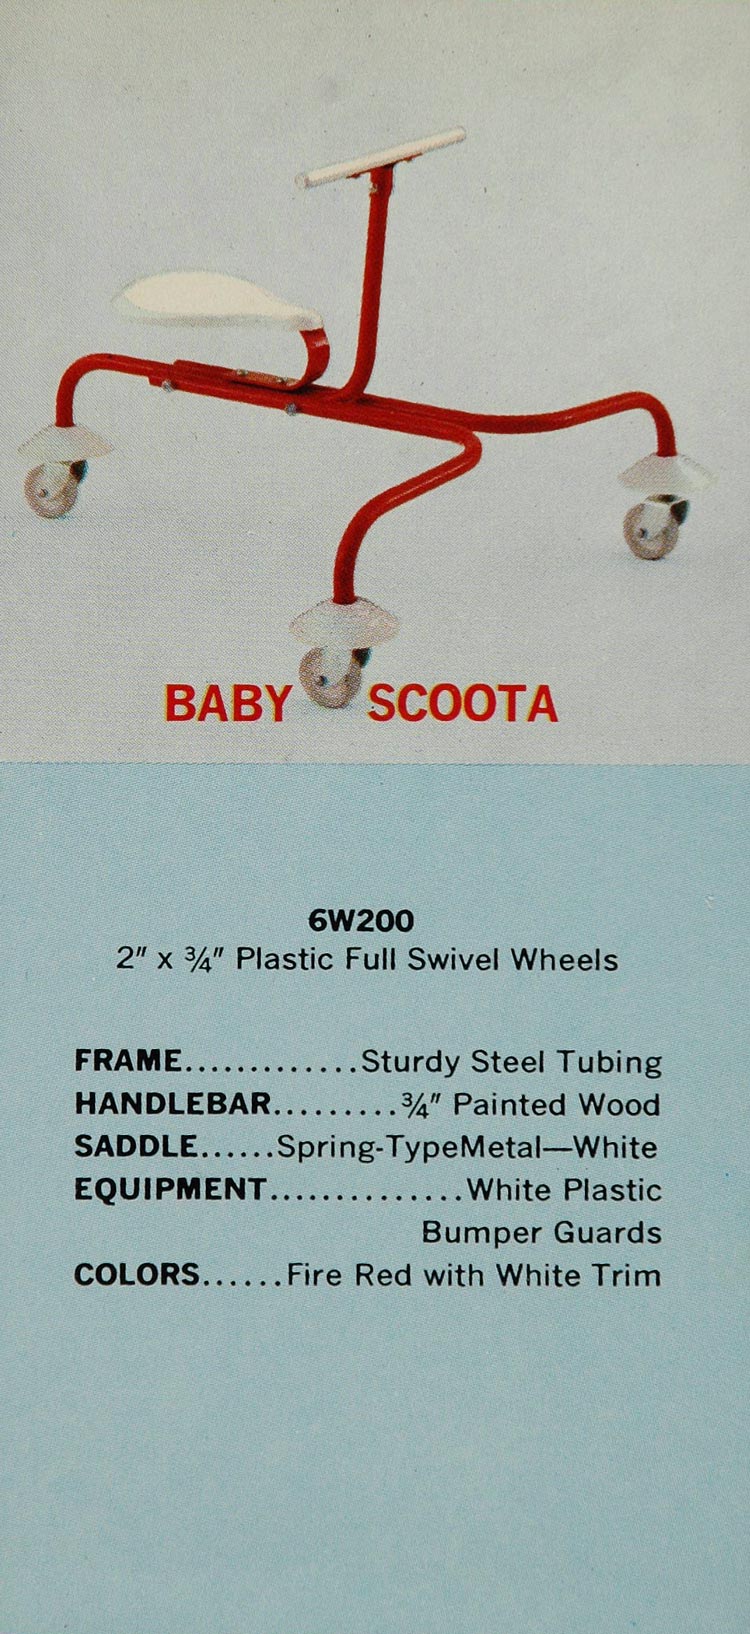 1961 Ad Baby Scoota Riding Toy Evans 6W200 Red Scooter - ORIGINAL TOYS5